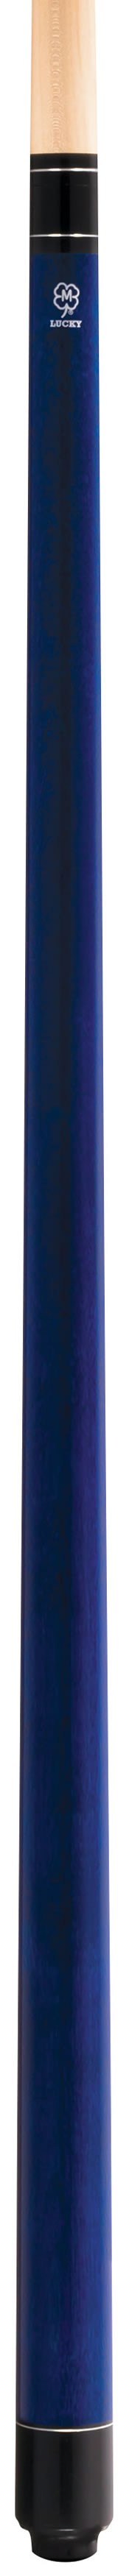 Lucky L2 Pool Cue Pool Cue